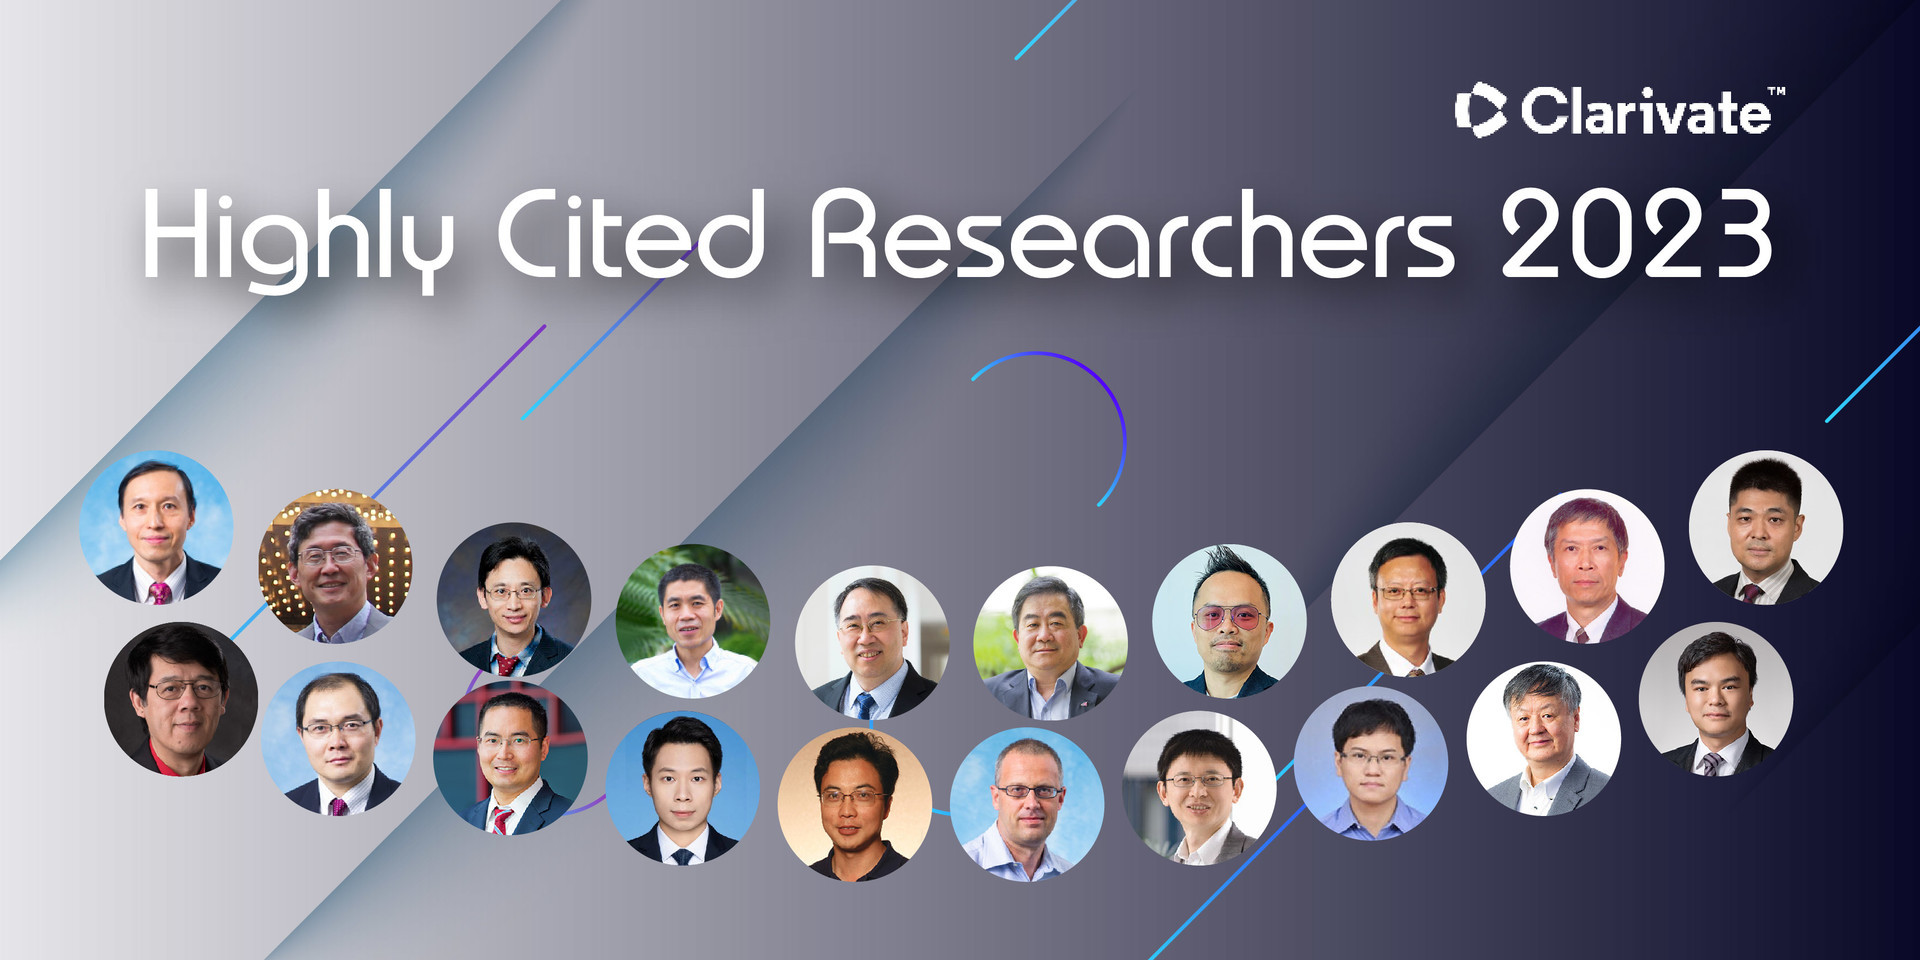 High-cited researchers 2023